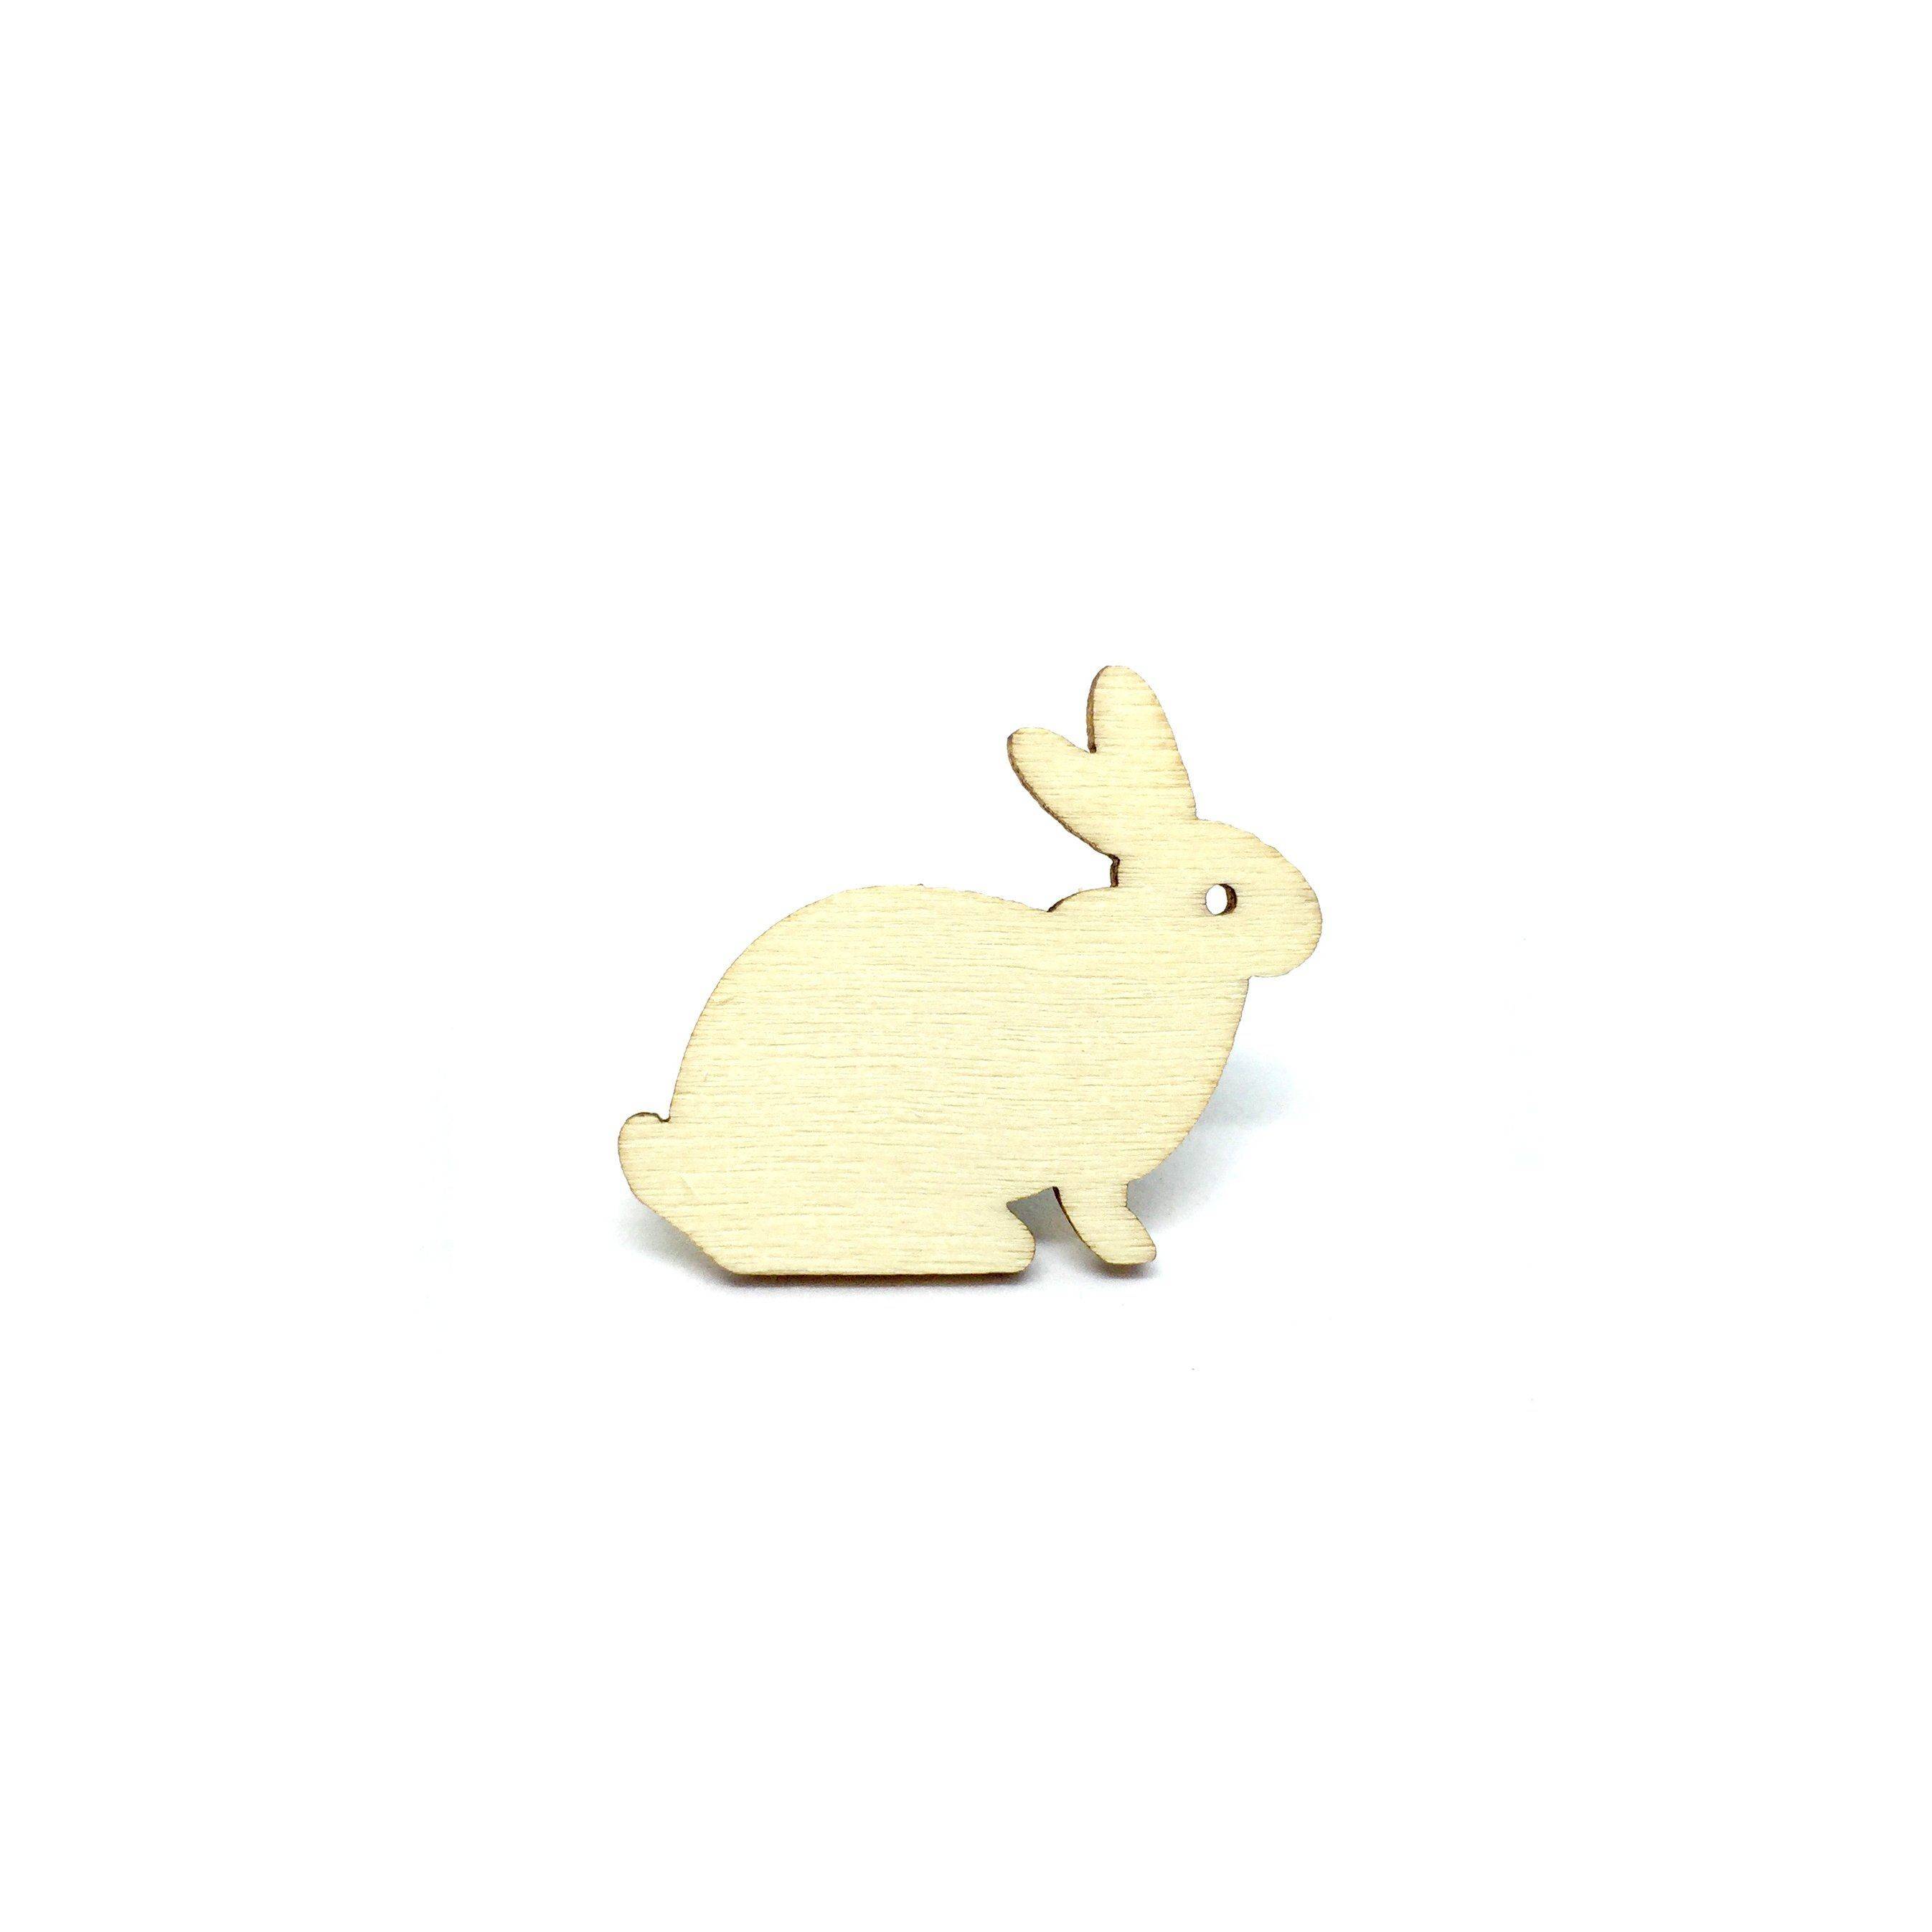 Lovely Rabbit Wooden Brooch Pin - Brooches - Paperdaise Accessories - Naiise